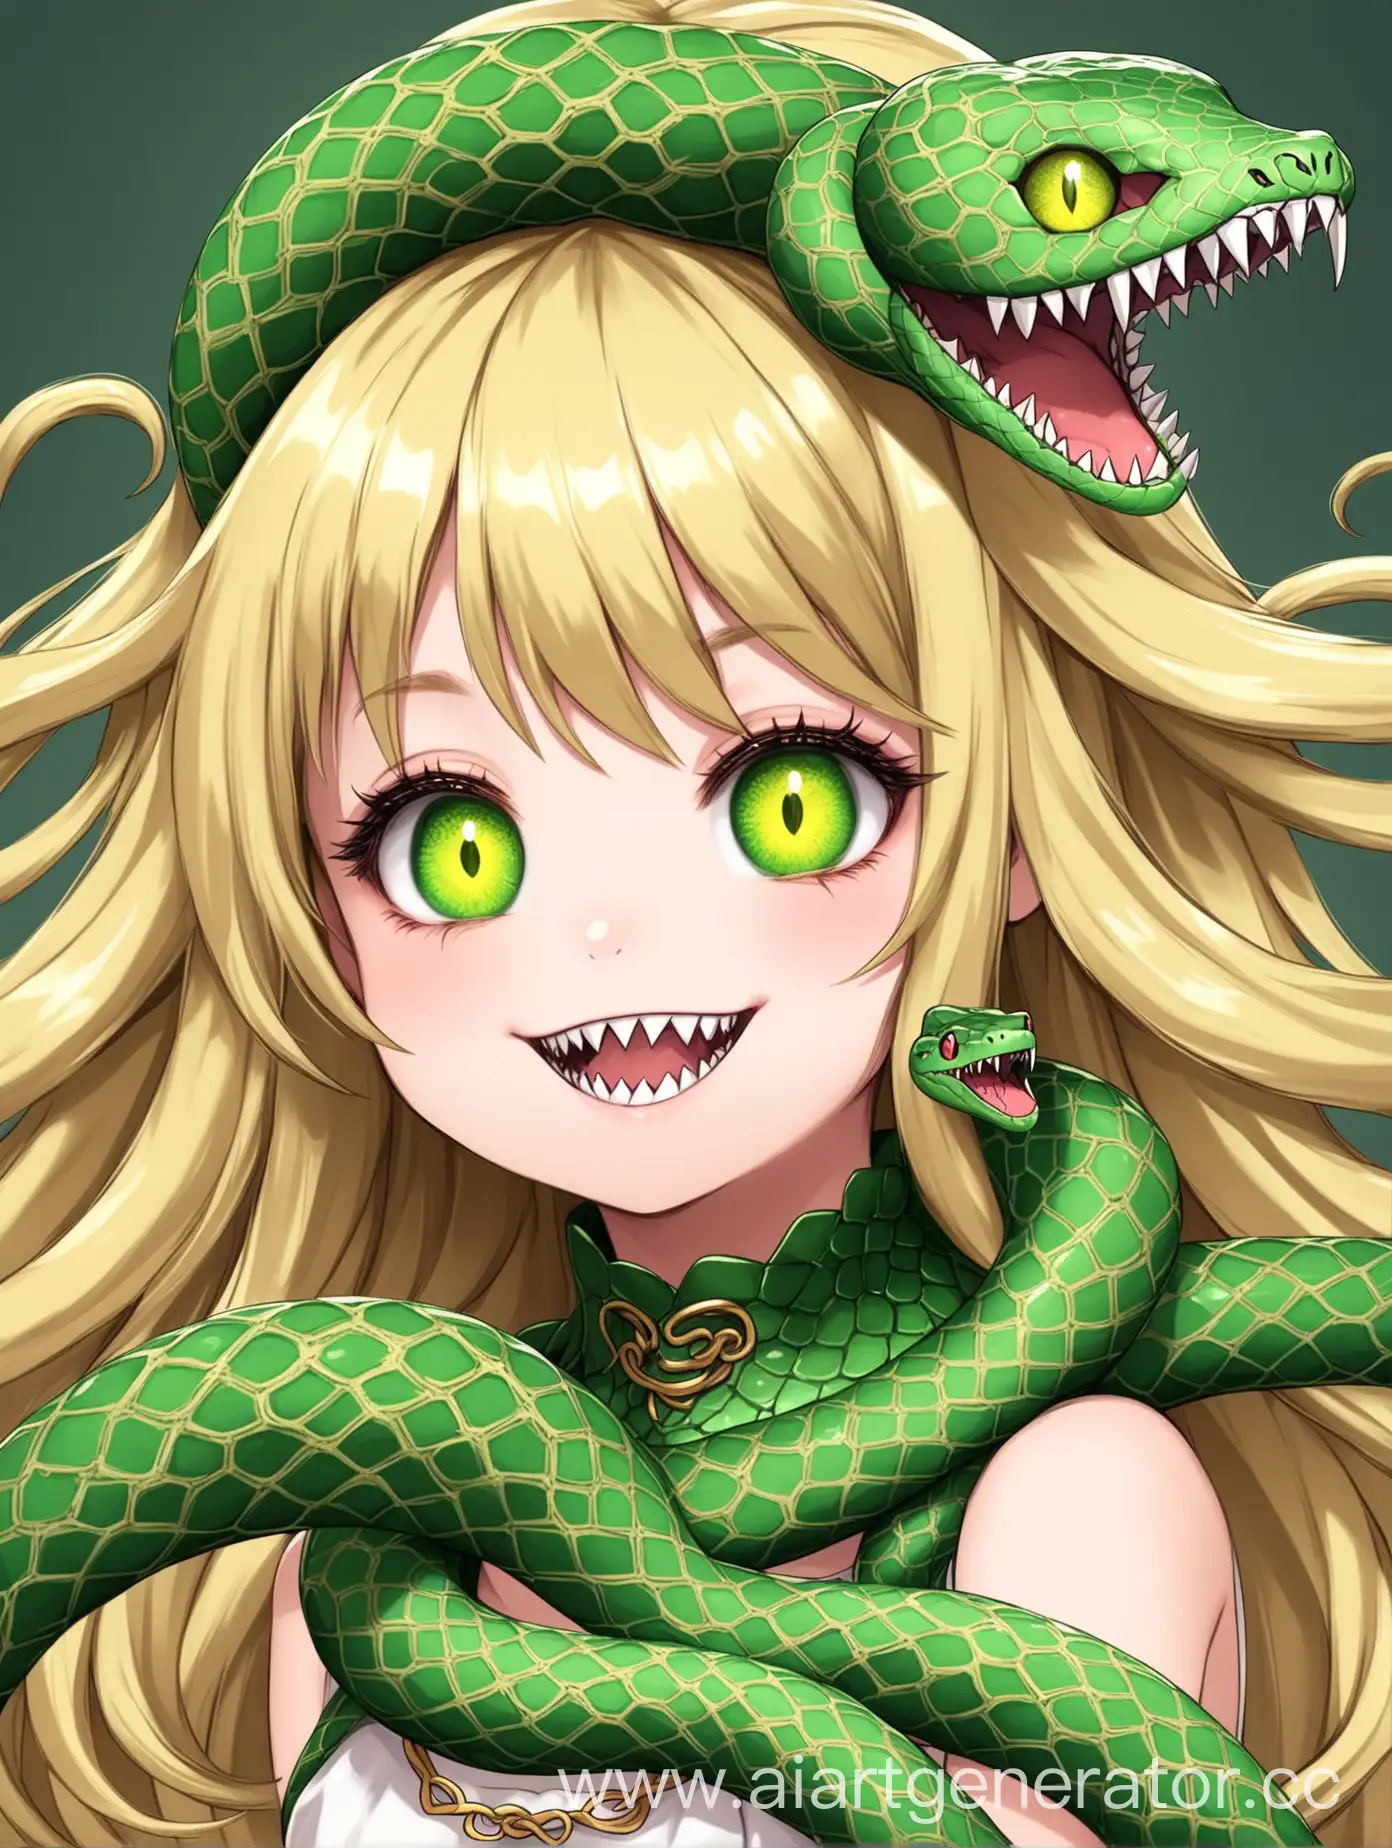 Cute-Blonde-and-Green-Haired-Loli-with-MedusaInspired-Snakes